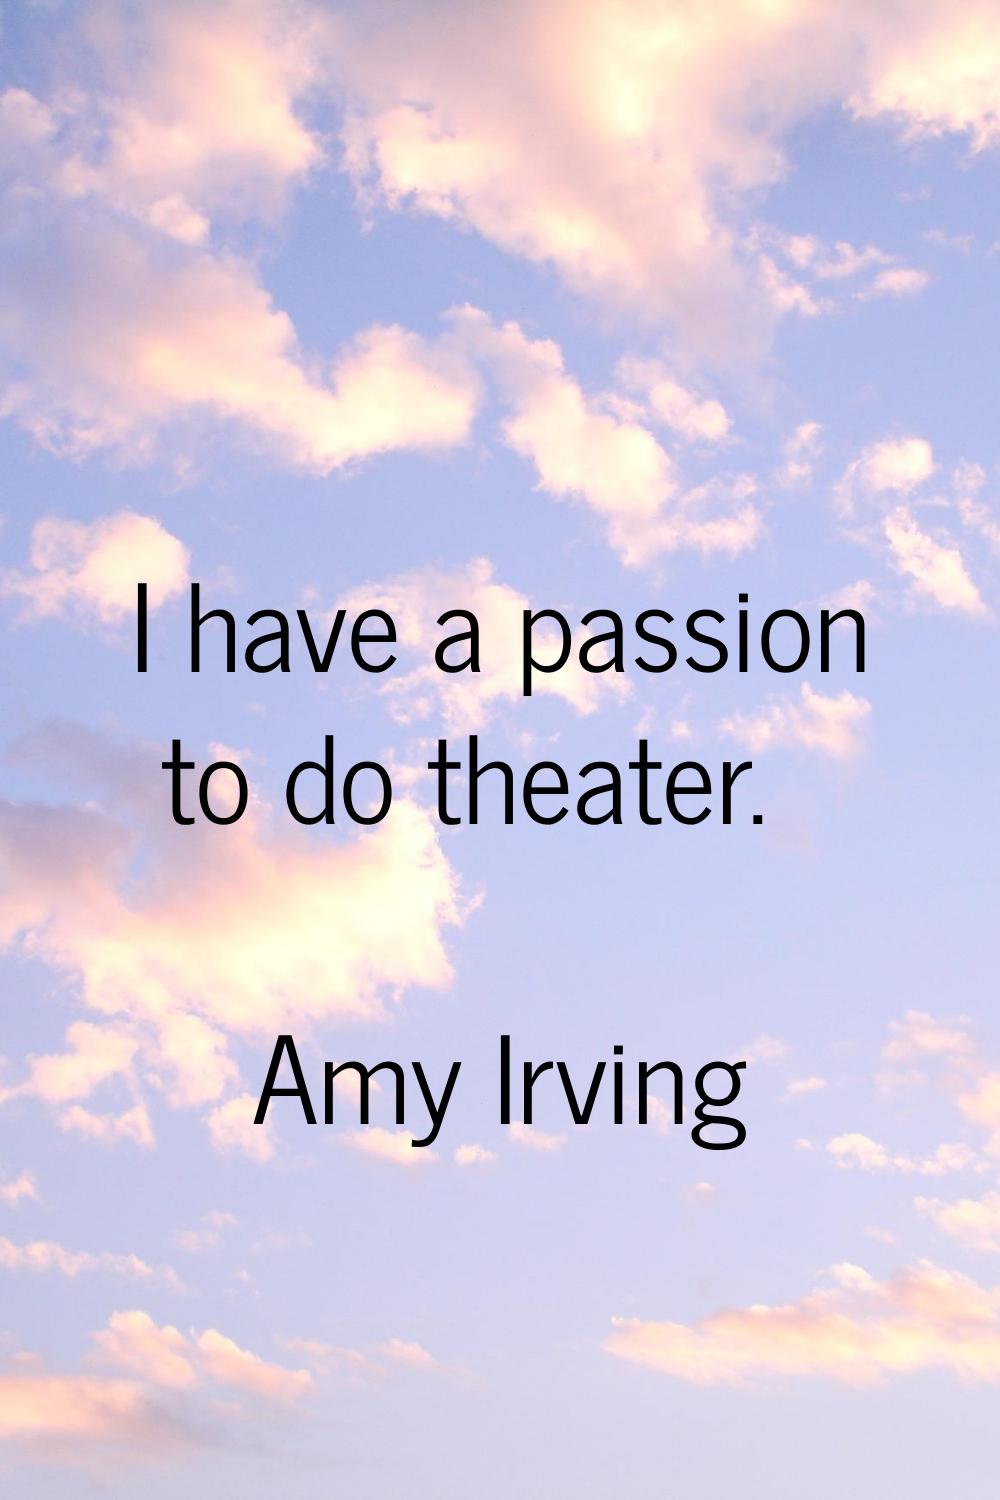 I have a passion to do theater.